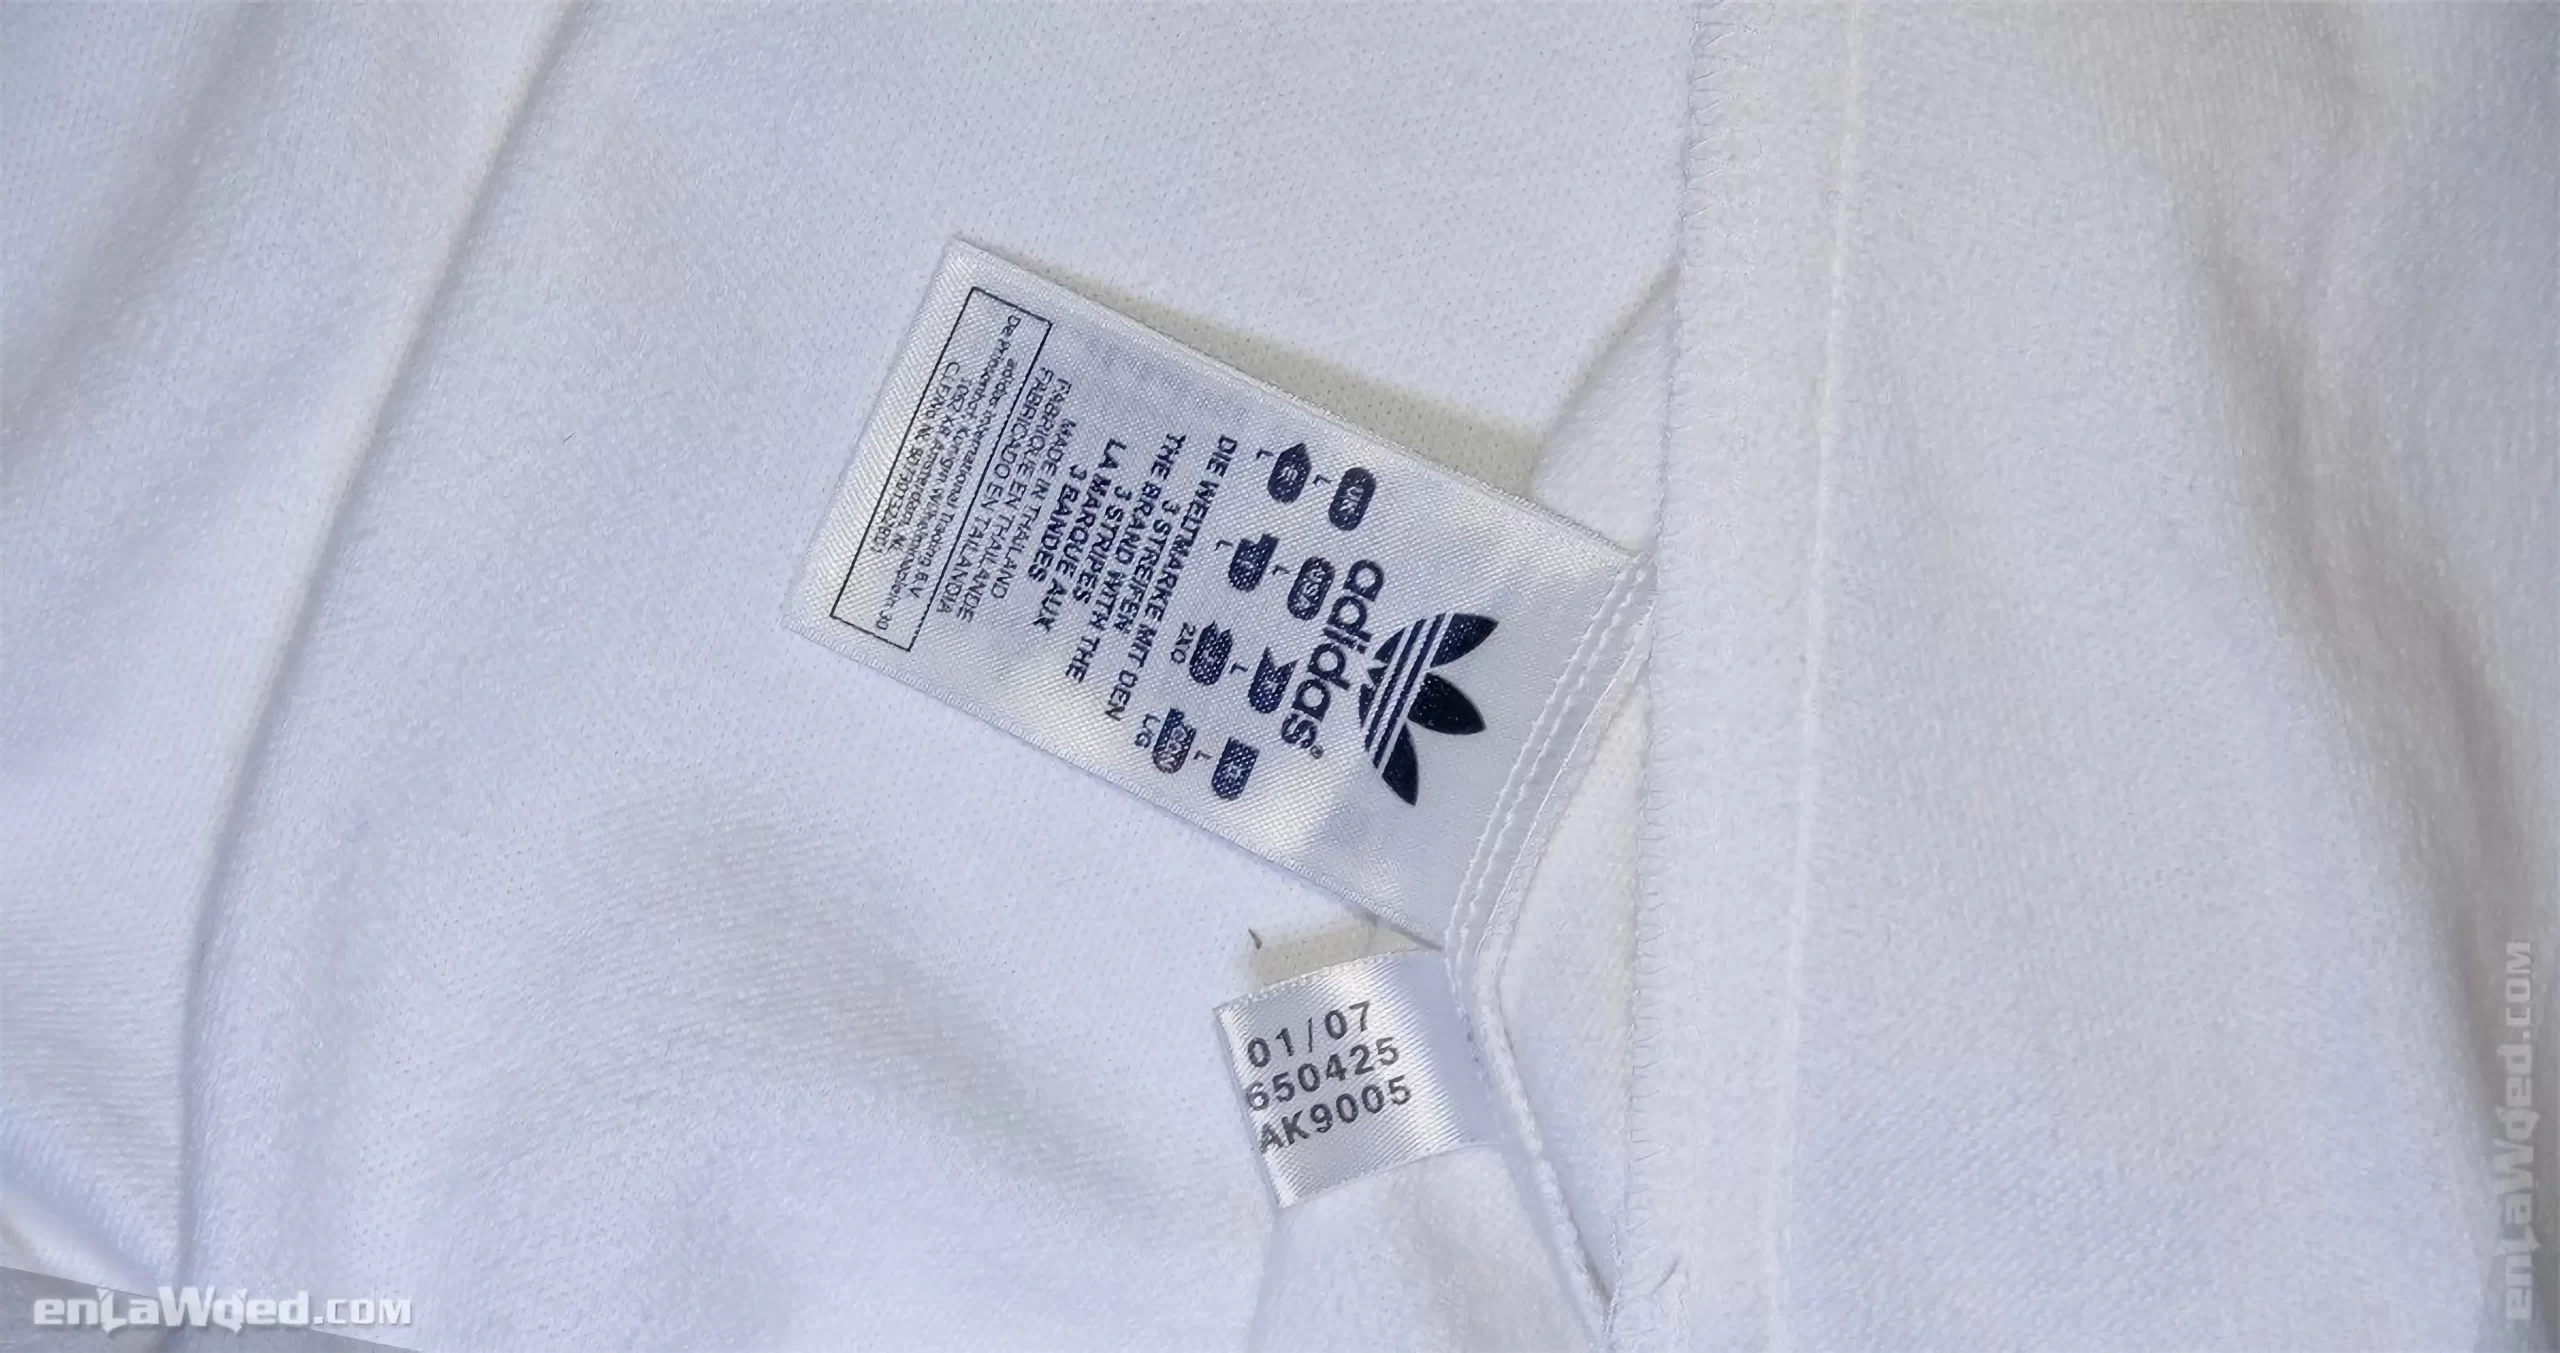 Adidas tag of the Ibiza jacket, with the month and year of fabrication: 01/2007